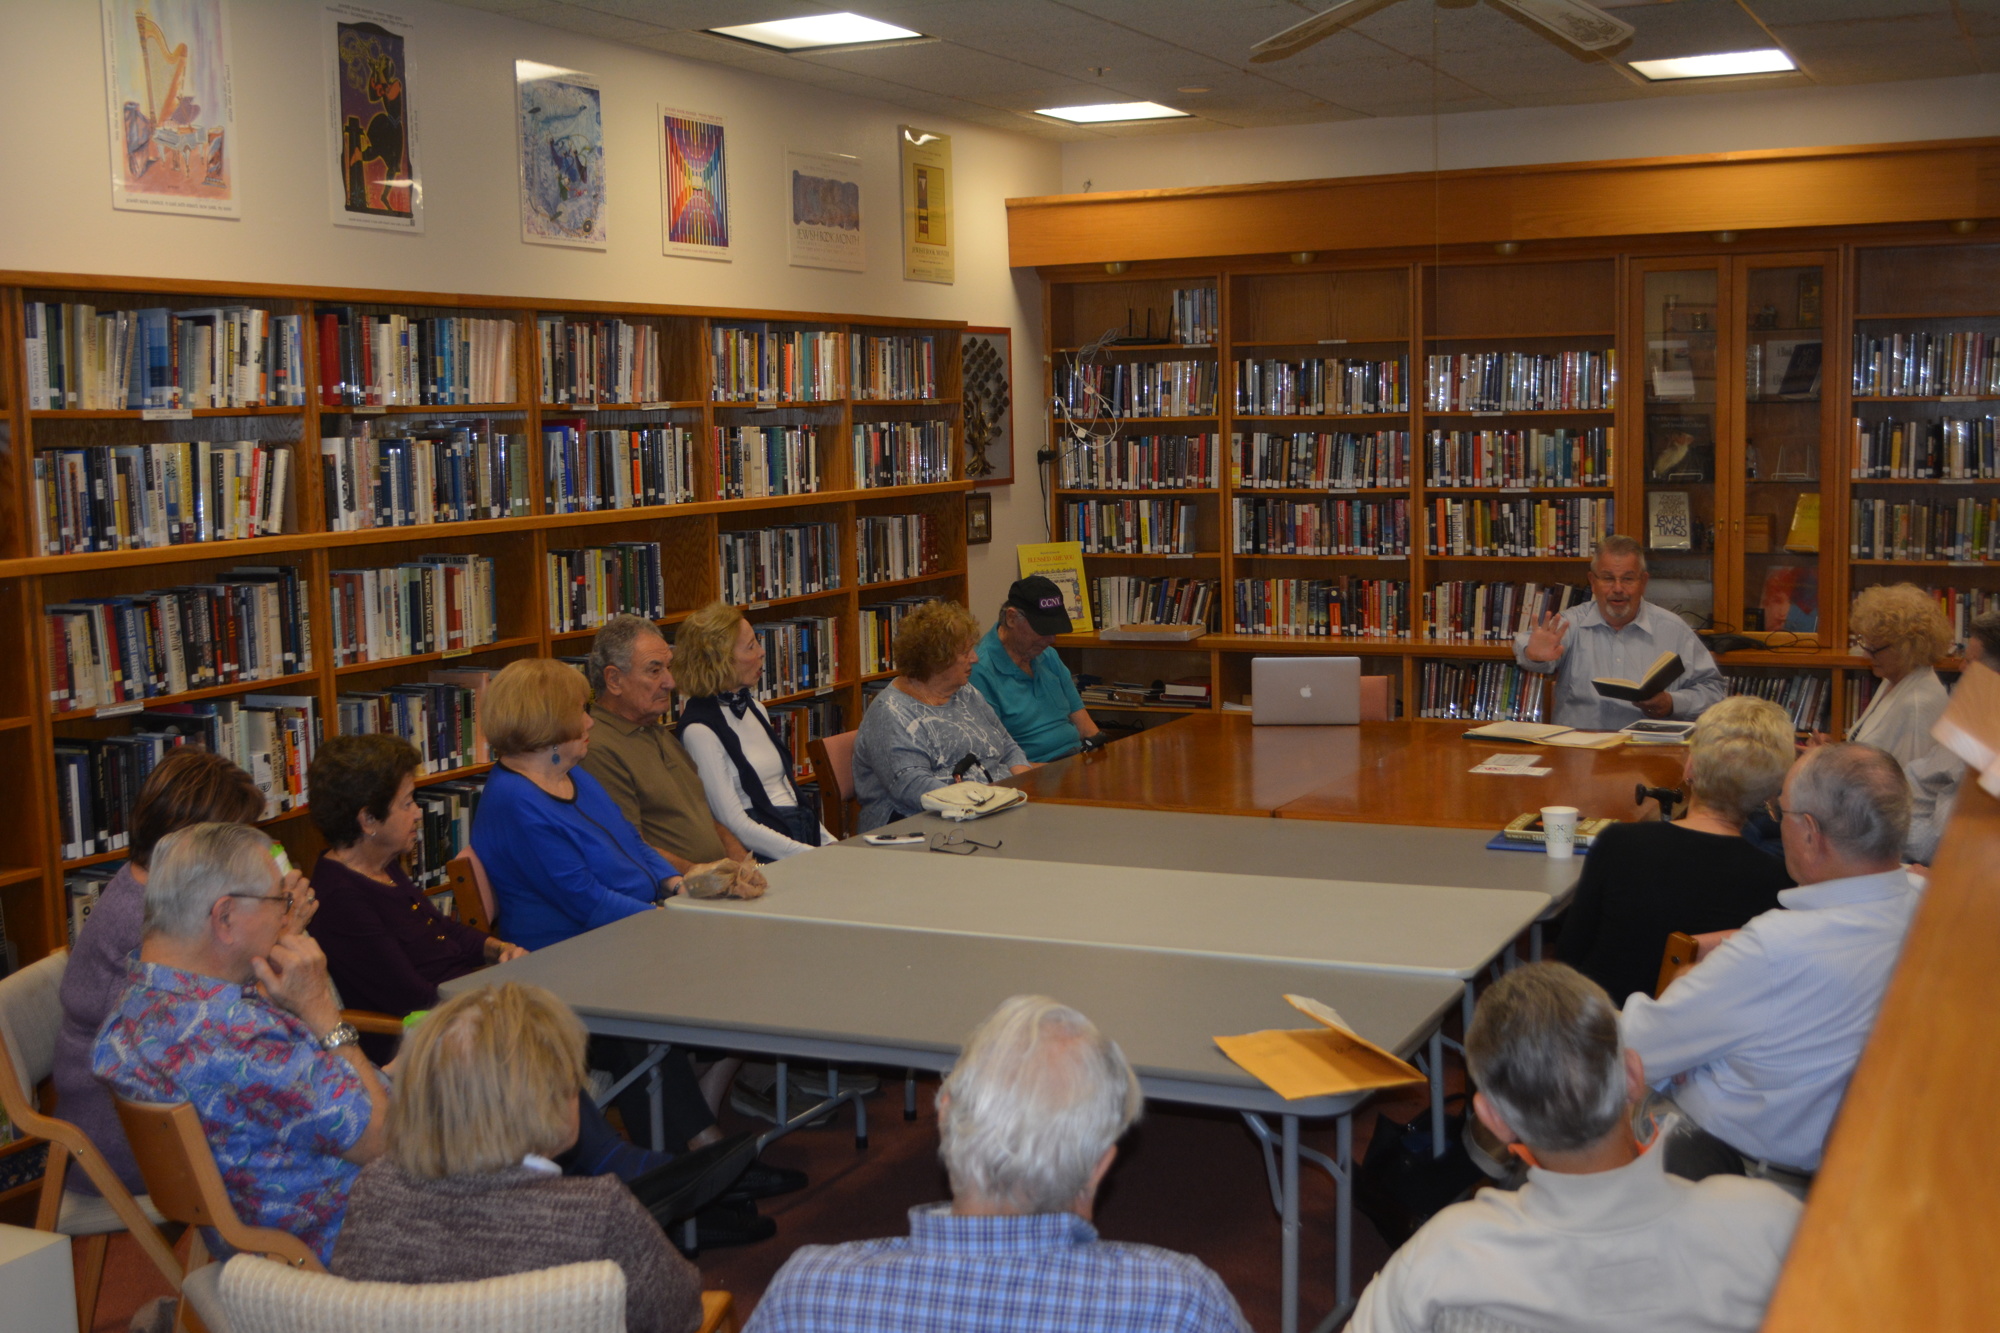 Rabbi Stephen Sniderman speaks to congregants during a lesson about Kristallnacht. Nineteen people attended the session.